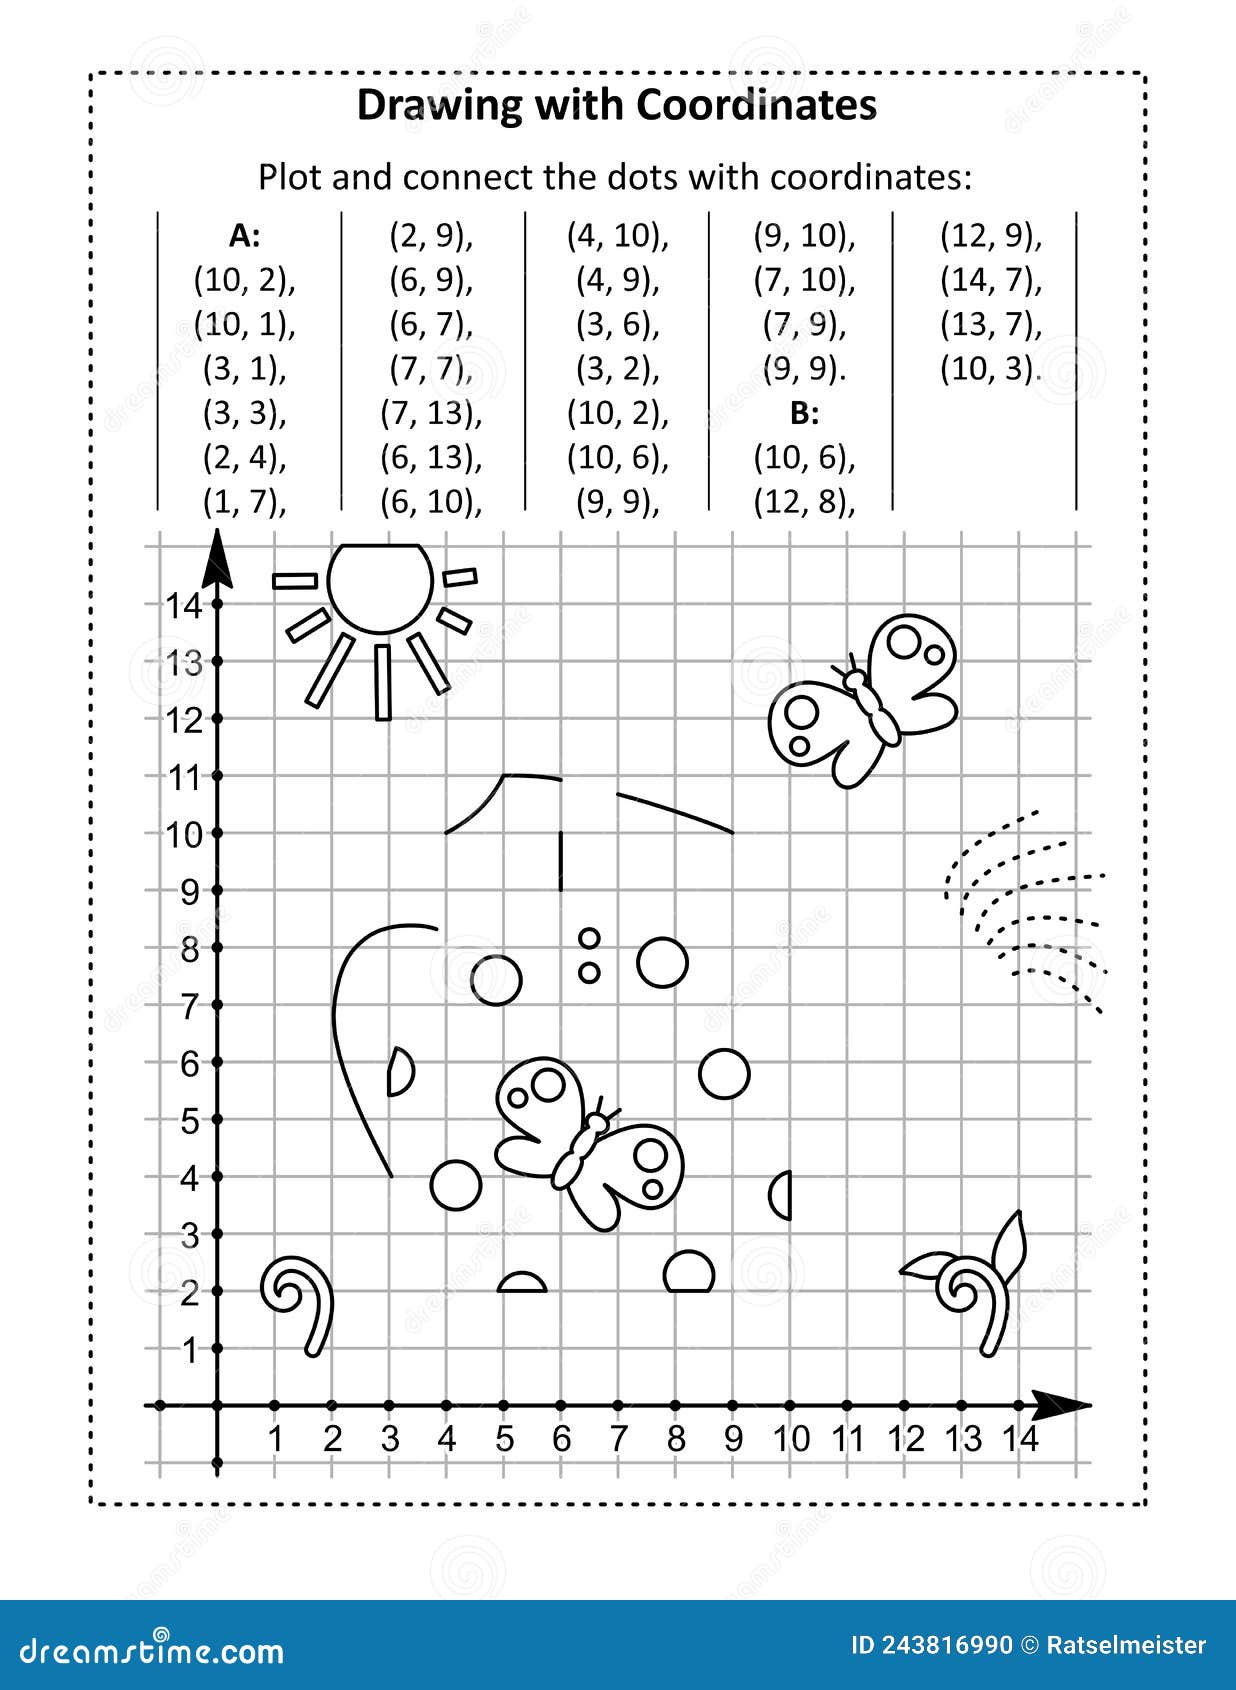 coordinate graphing, or drawing by coordinates, math worksheet with watering can: reveal the mystery picture by plotting and conne